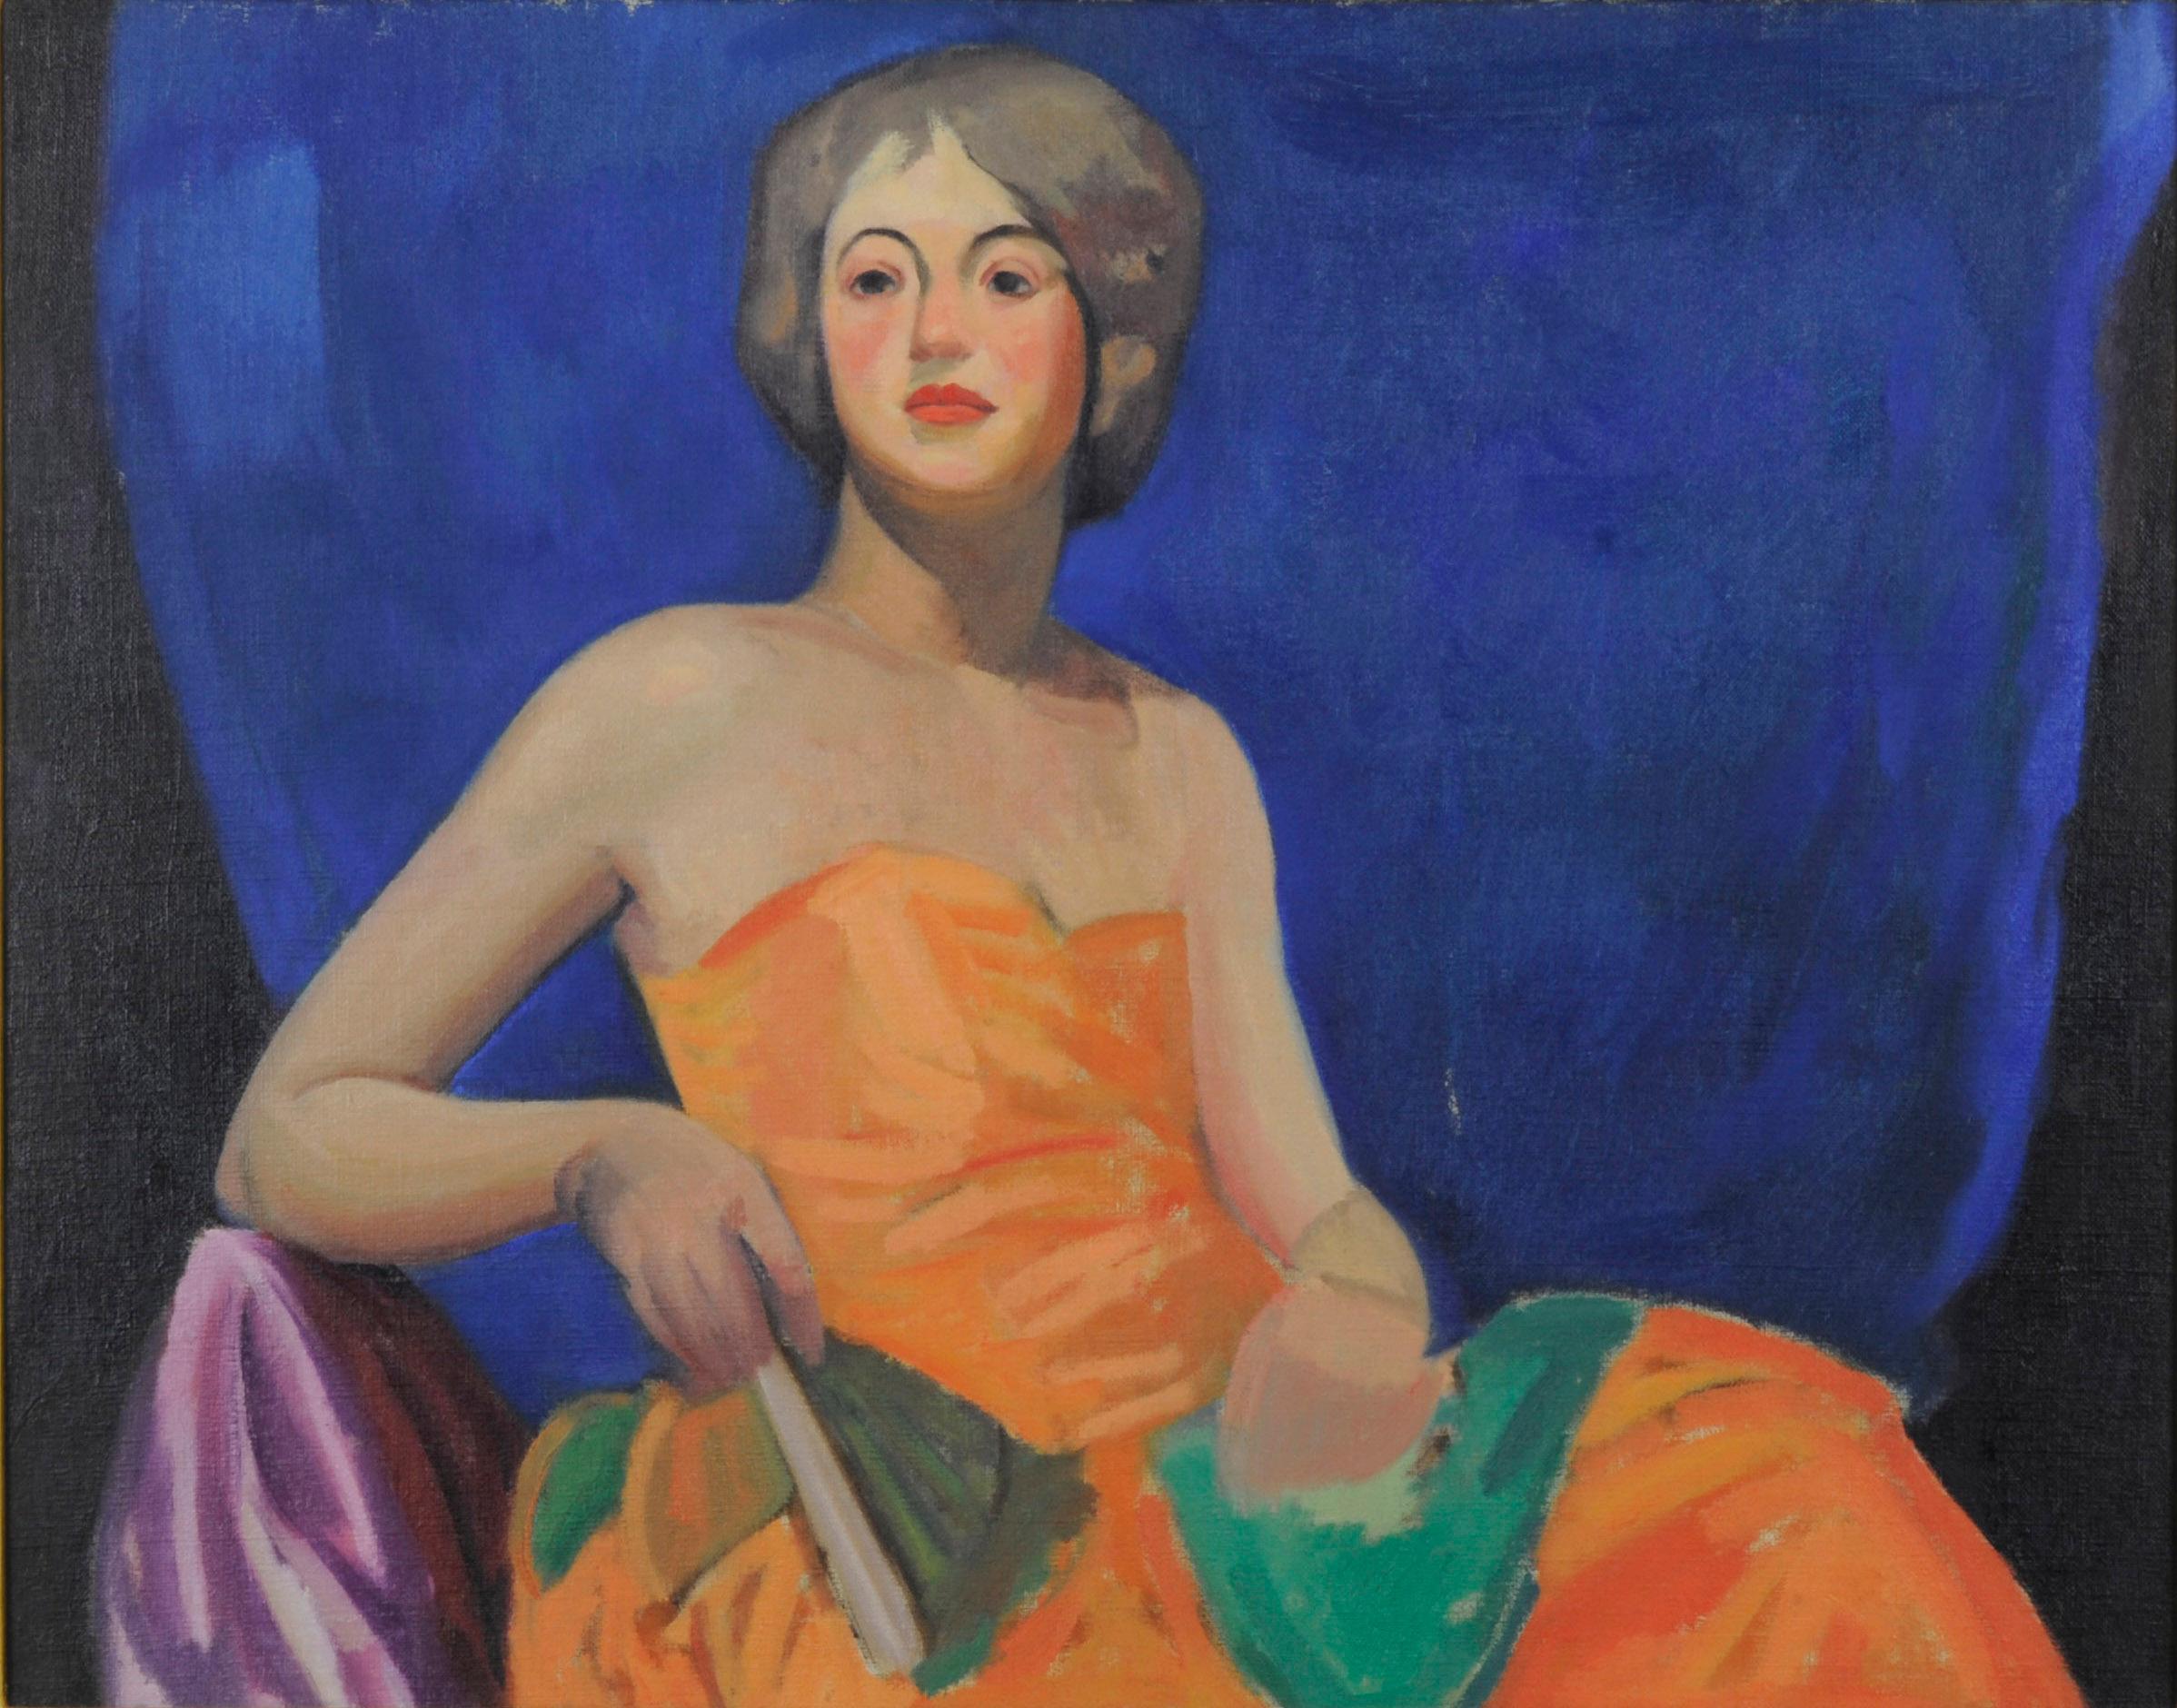 Deco Woman in Orange Dress
Oil on canvas, 1935
Unsigned
Provenance: Estate of the Artist
Canvas size: 22 x 28 inches
Frame size: 28 3/4 x 34 1/2 inches
Paul H. Winchell (1903 – 1971) was a printmaker, illustrator, teacher, and gilder according to